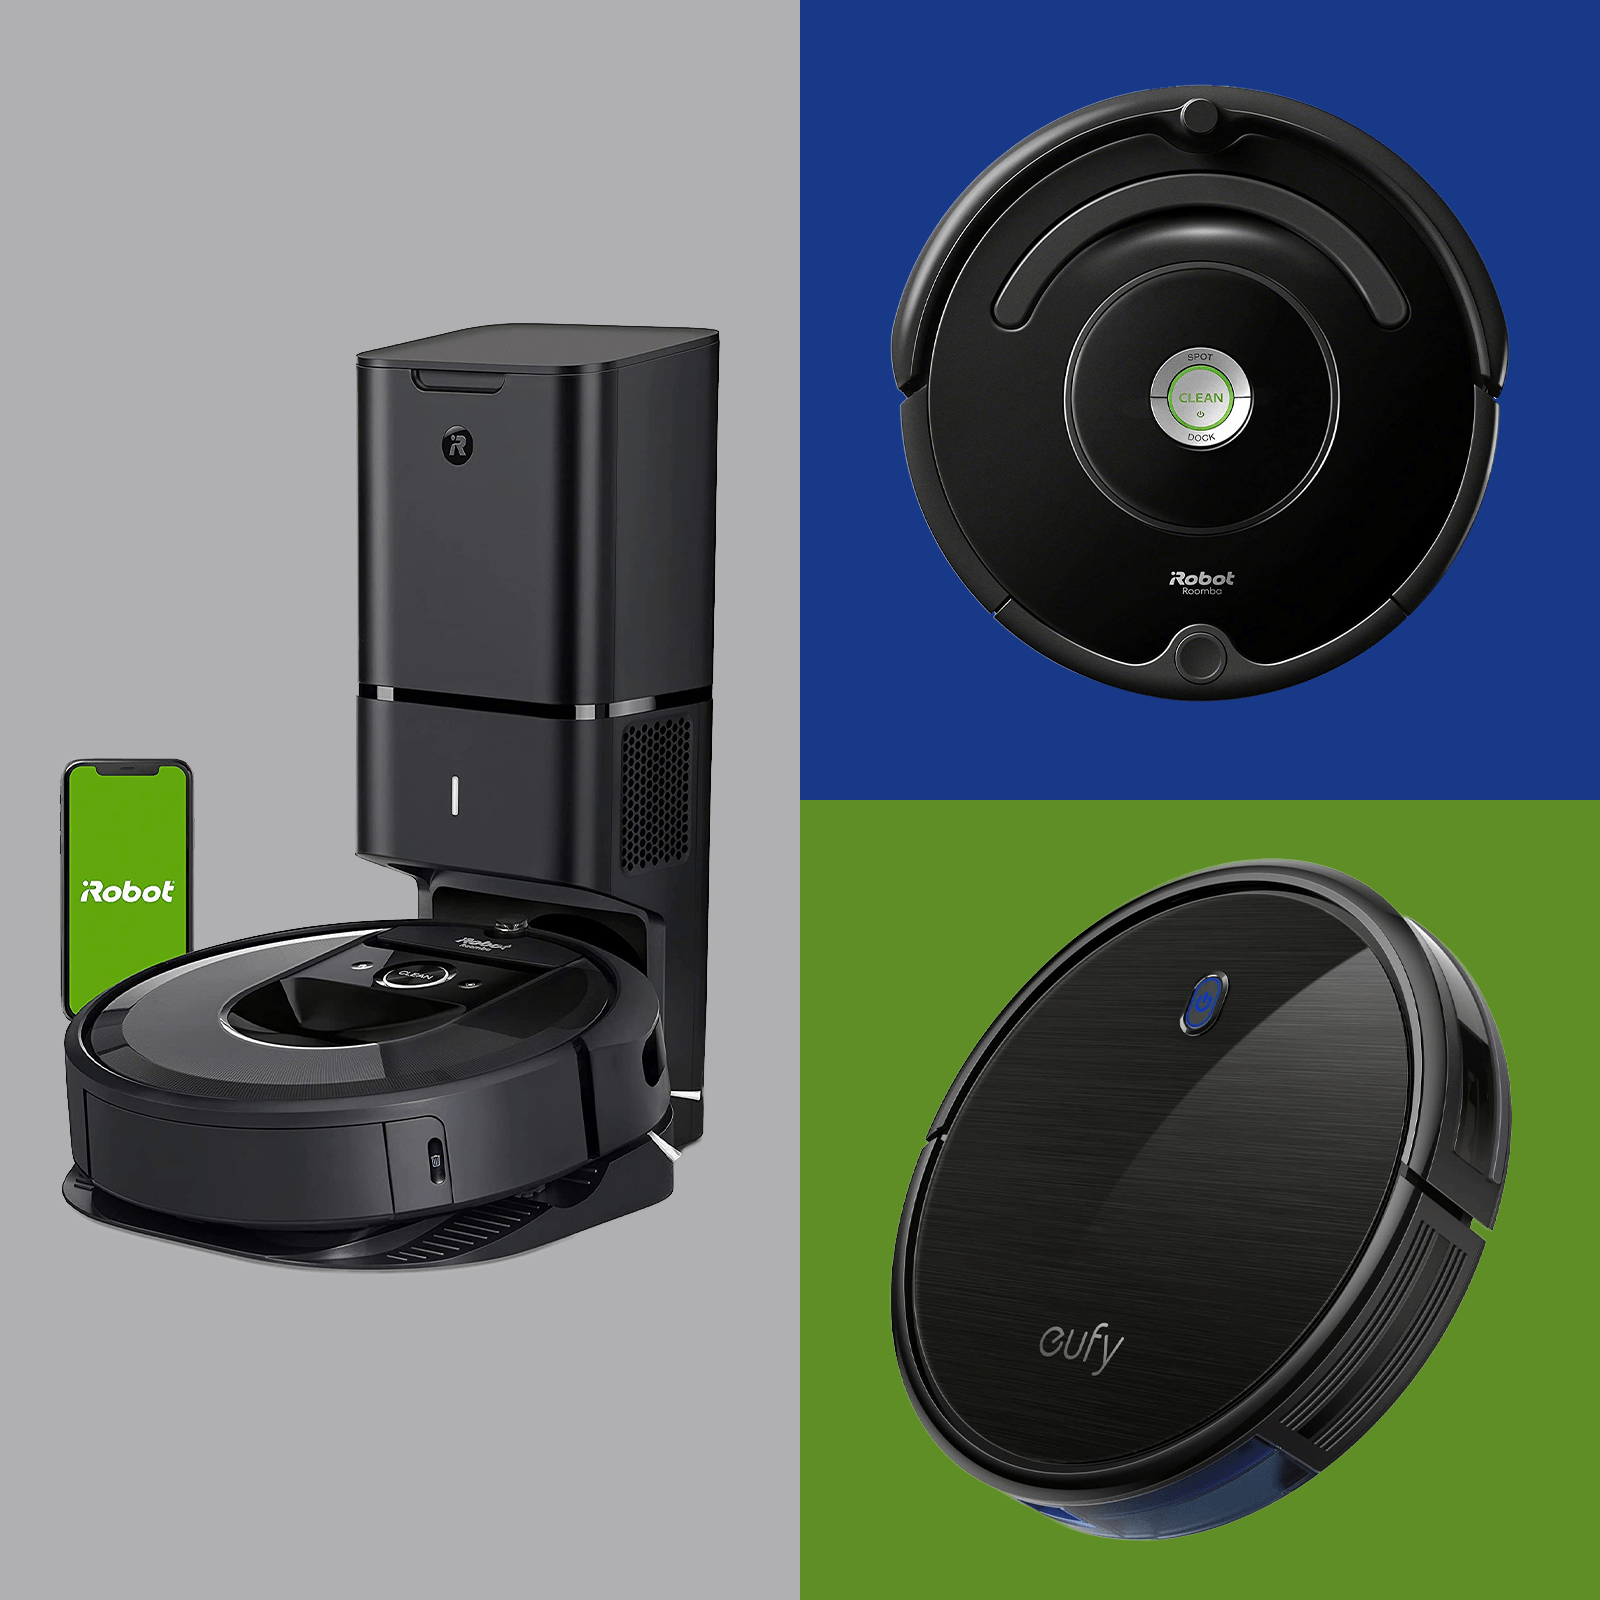 7 Best Robot Vacuums 2022 Reviews of Roomba, Eufy, Shark & More